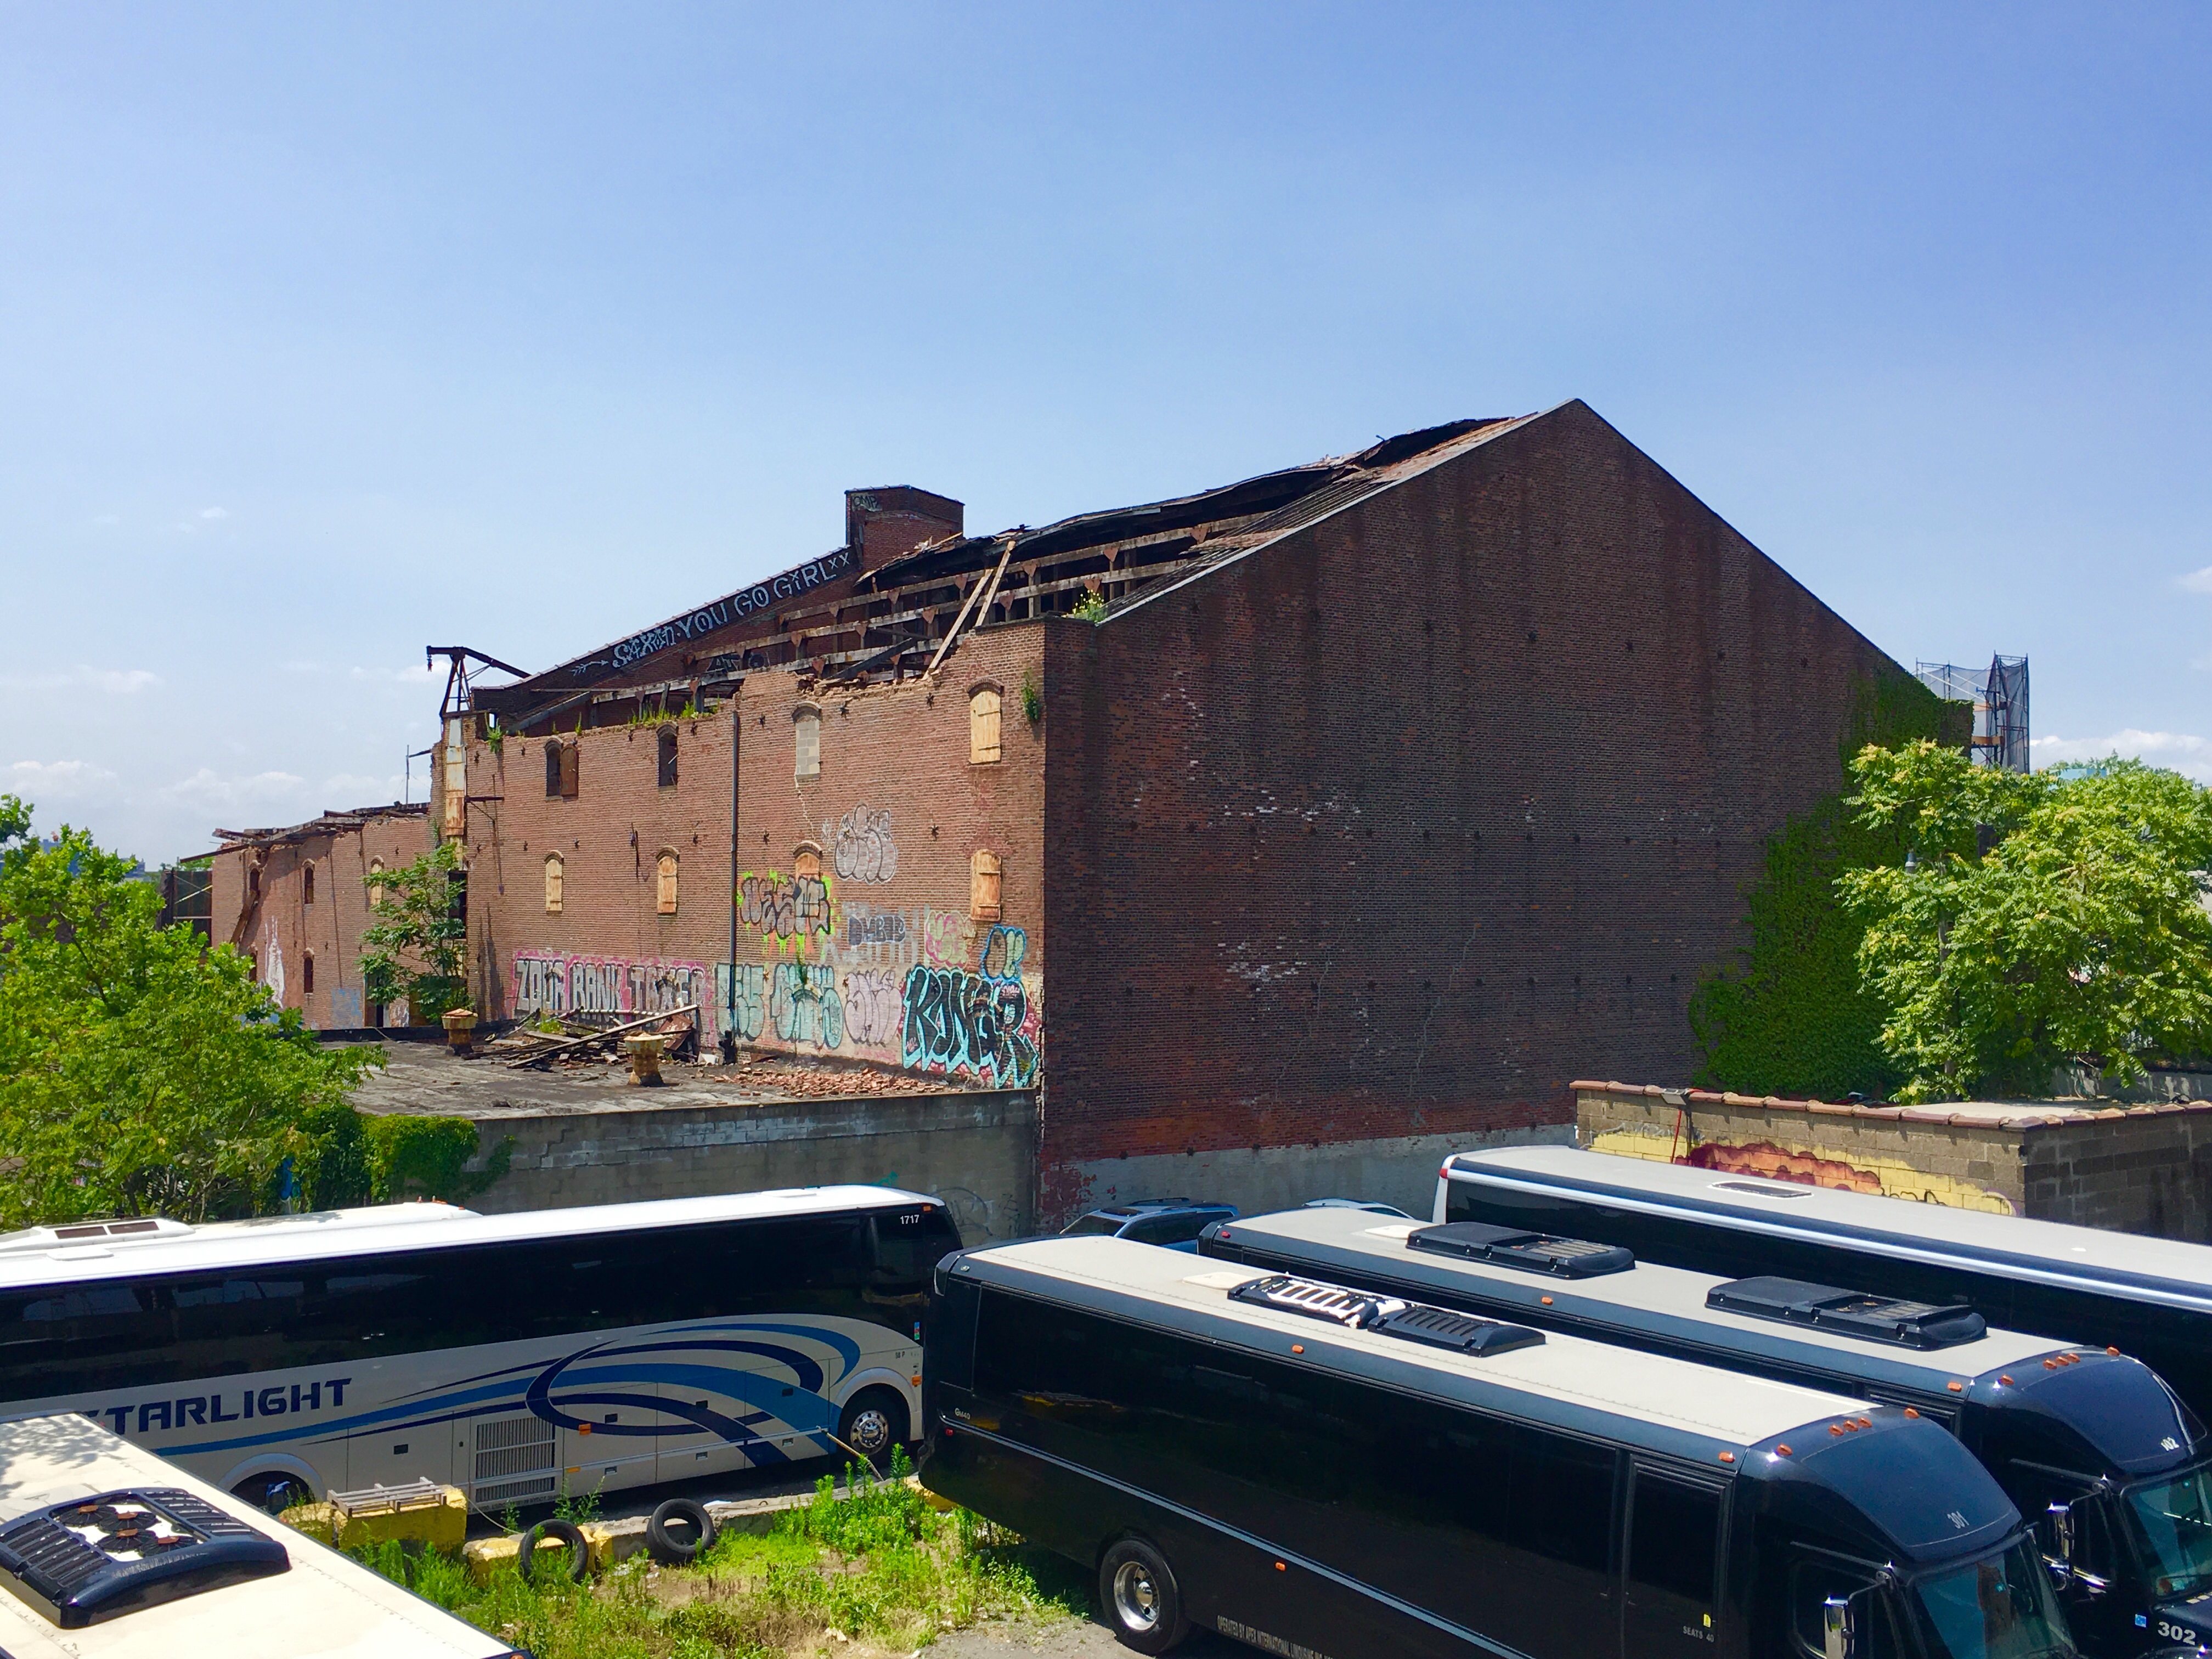 There’s a Stop Work Order at the S.W. Bowne Grain Storehouse, so no demolition can be done at this moment. Eagle photo by Lore Croghan